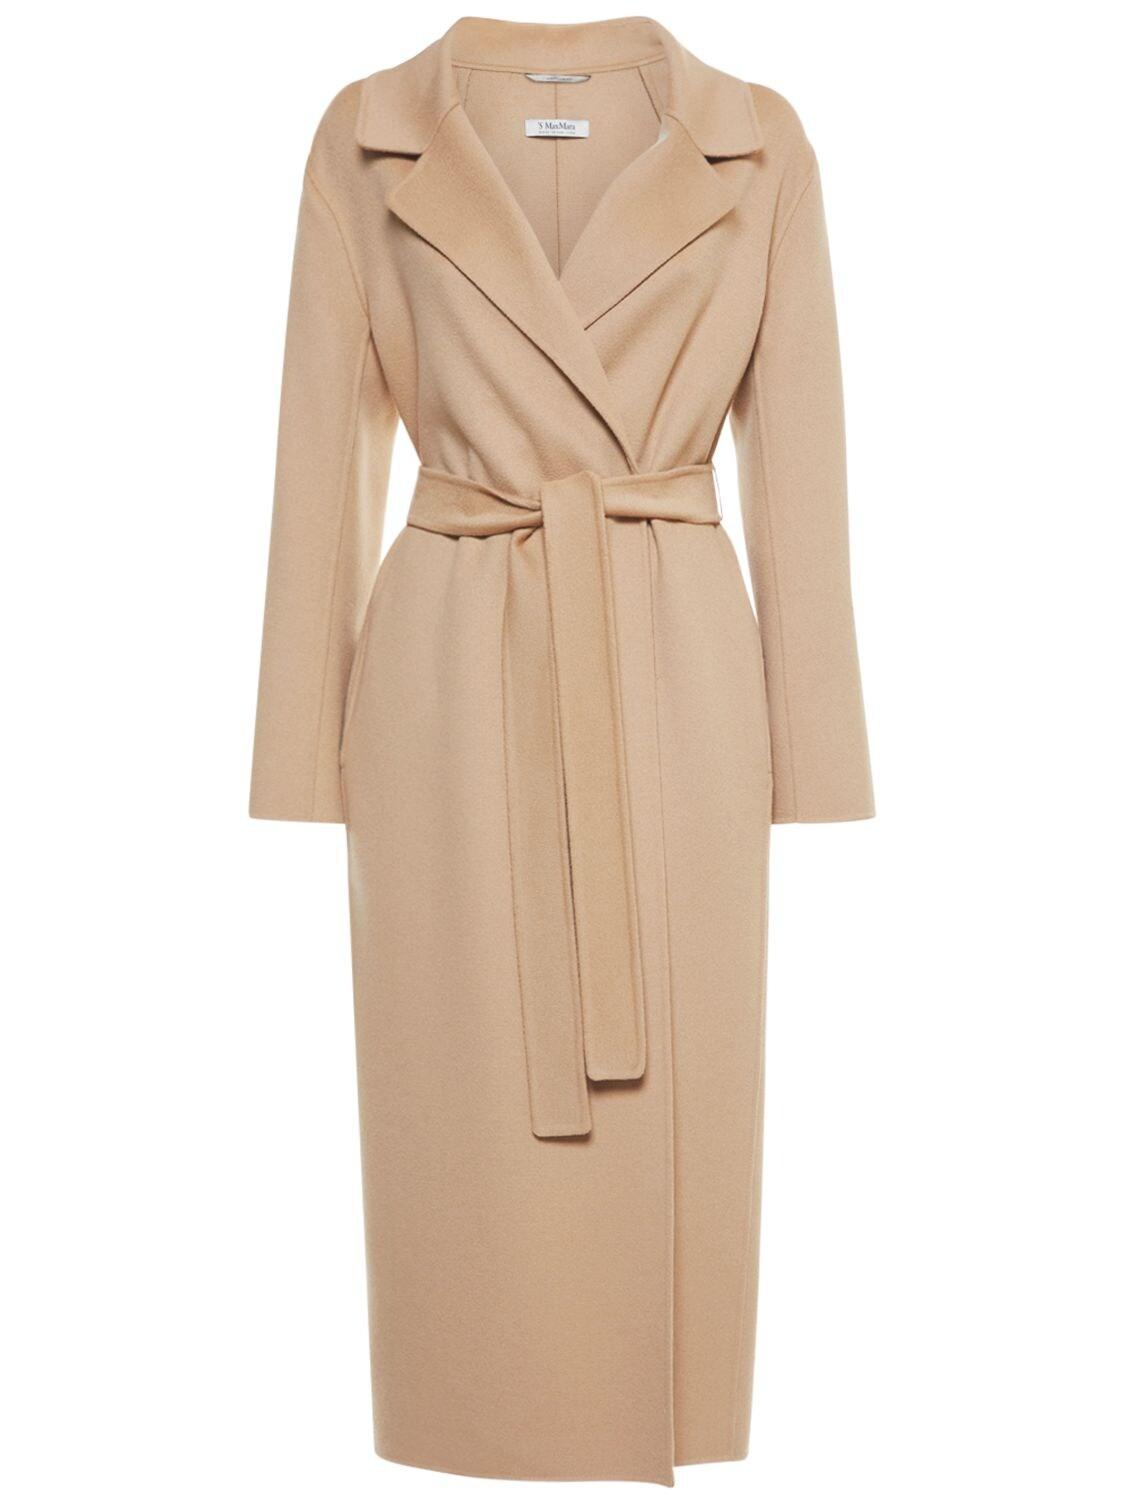 Max Mara Lirica Pure Wool Belted Long Coat in Pale Camel (Natural) | Lyst  Canada